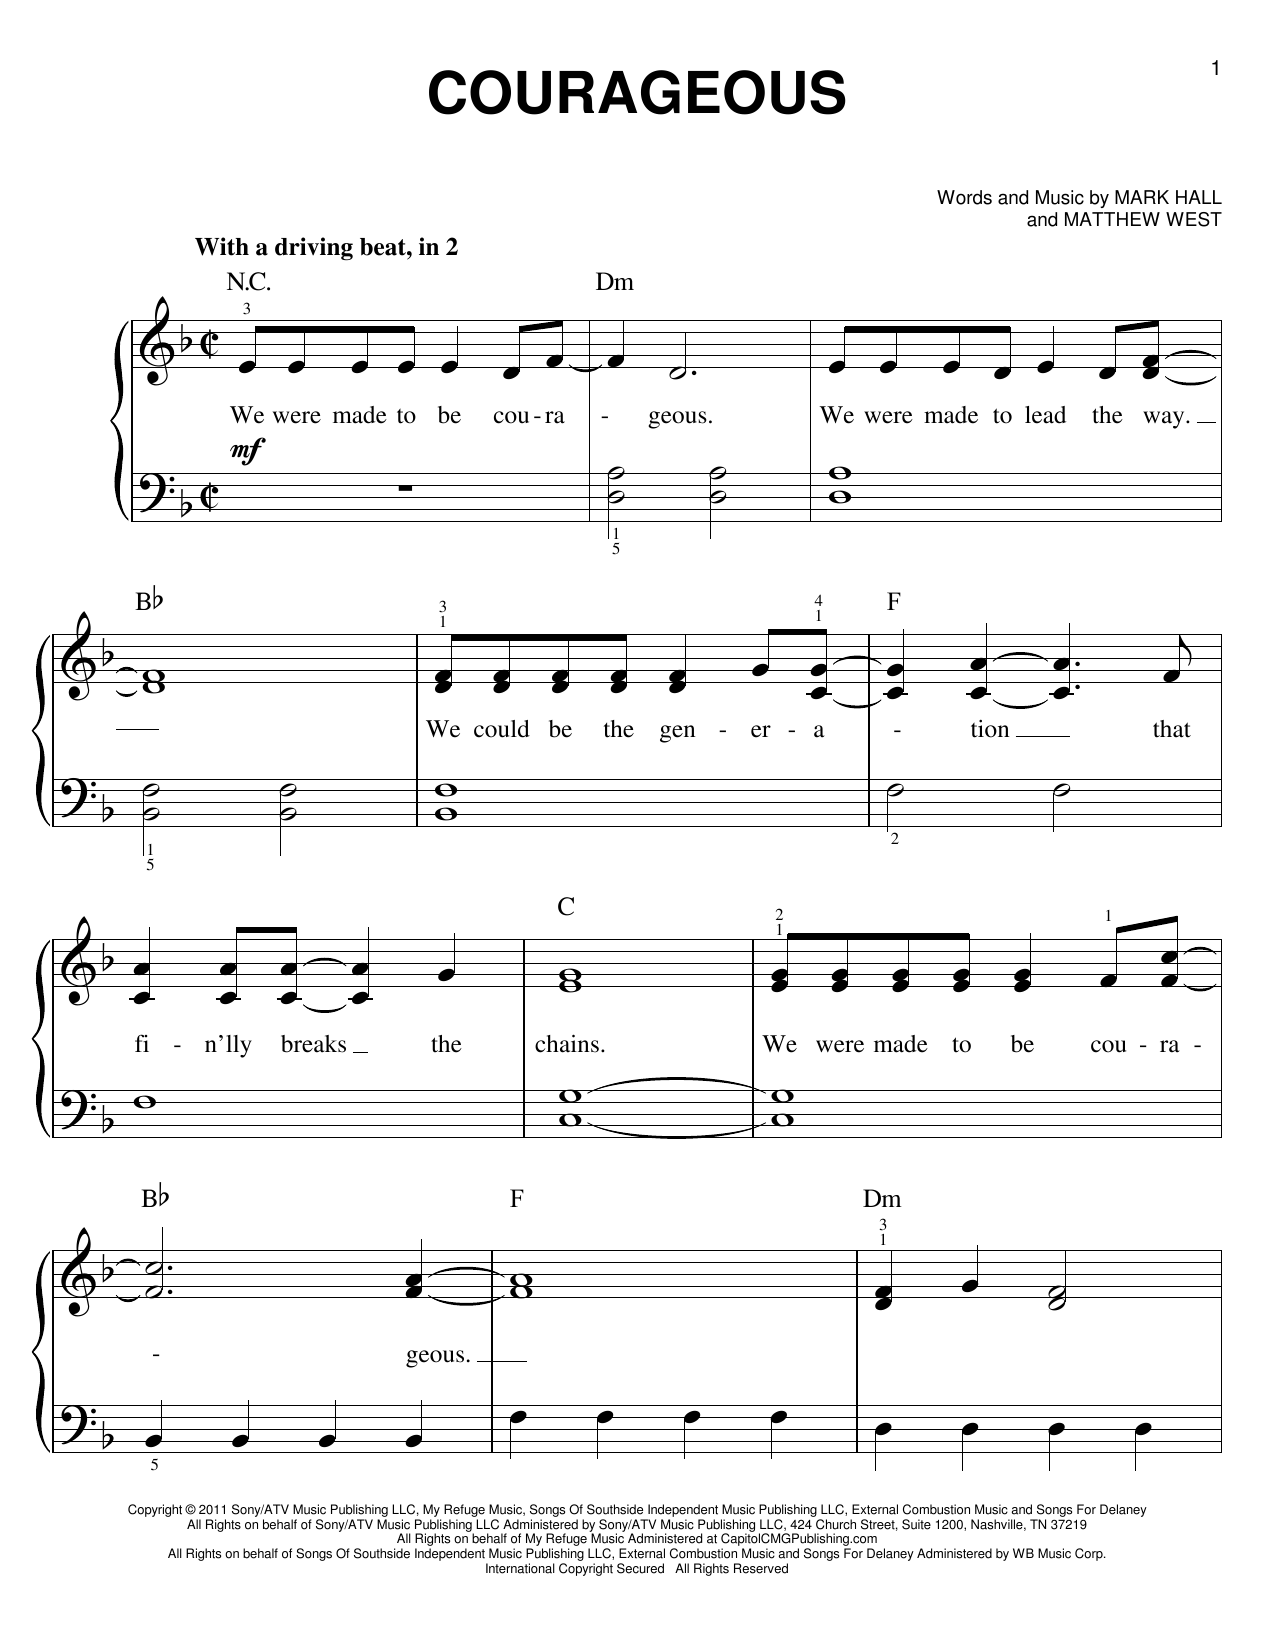 Download Casting Crowns Courageous Sheet Music